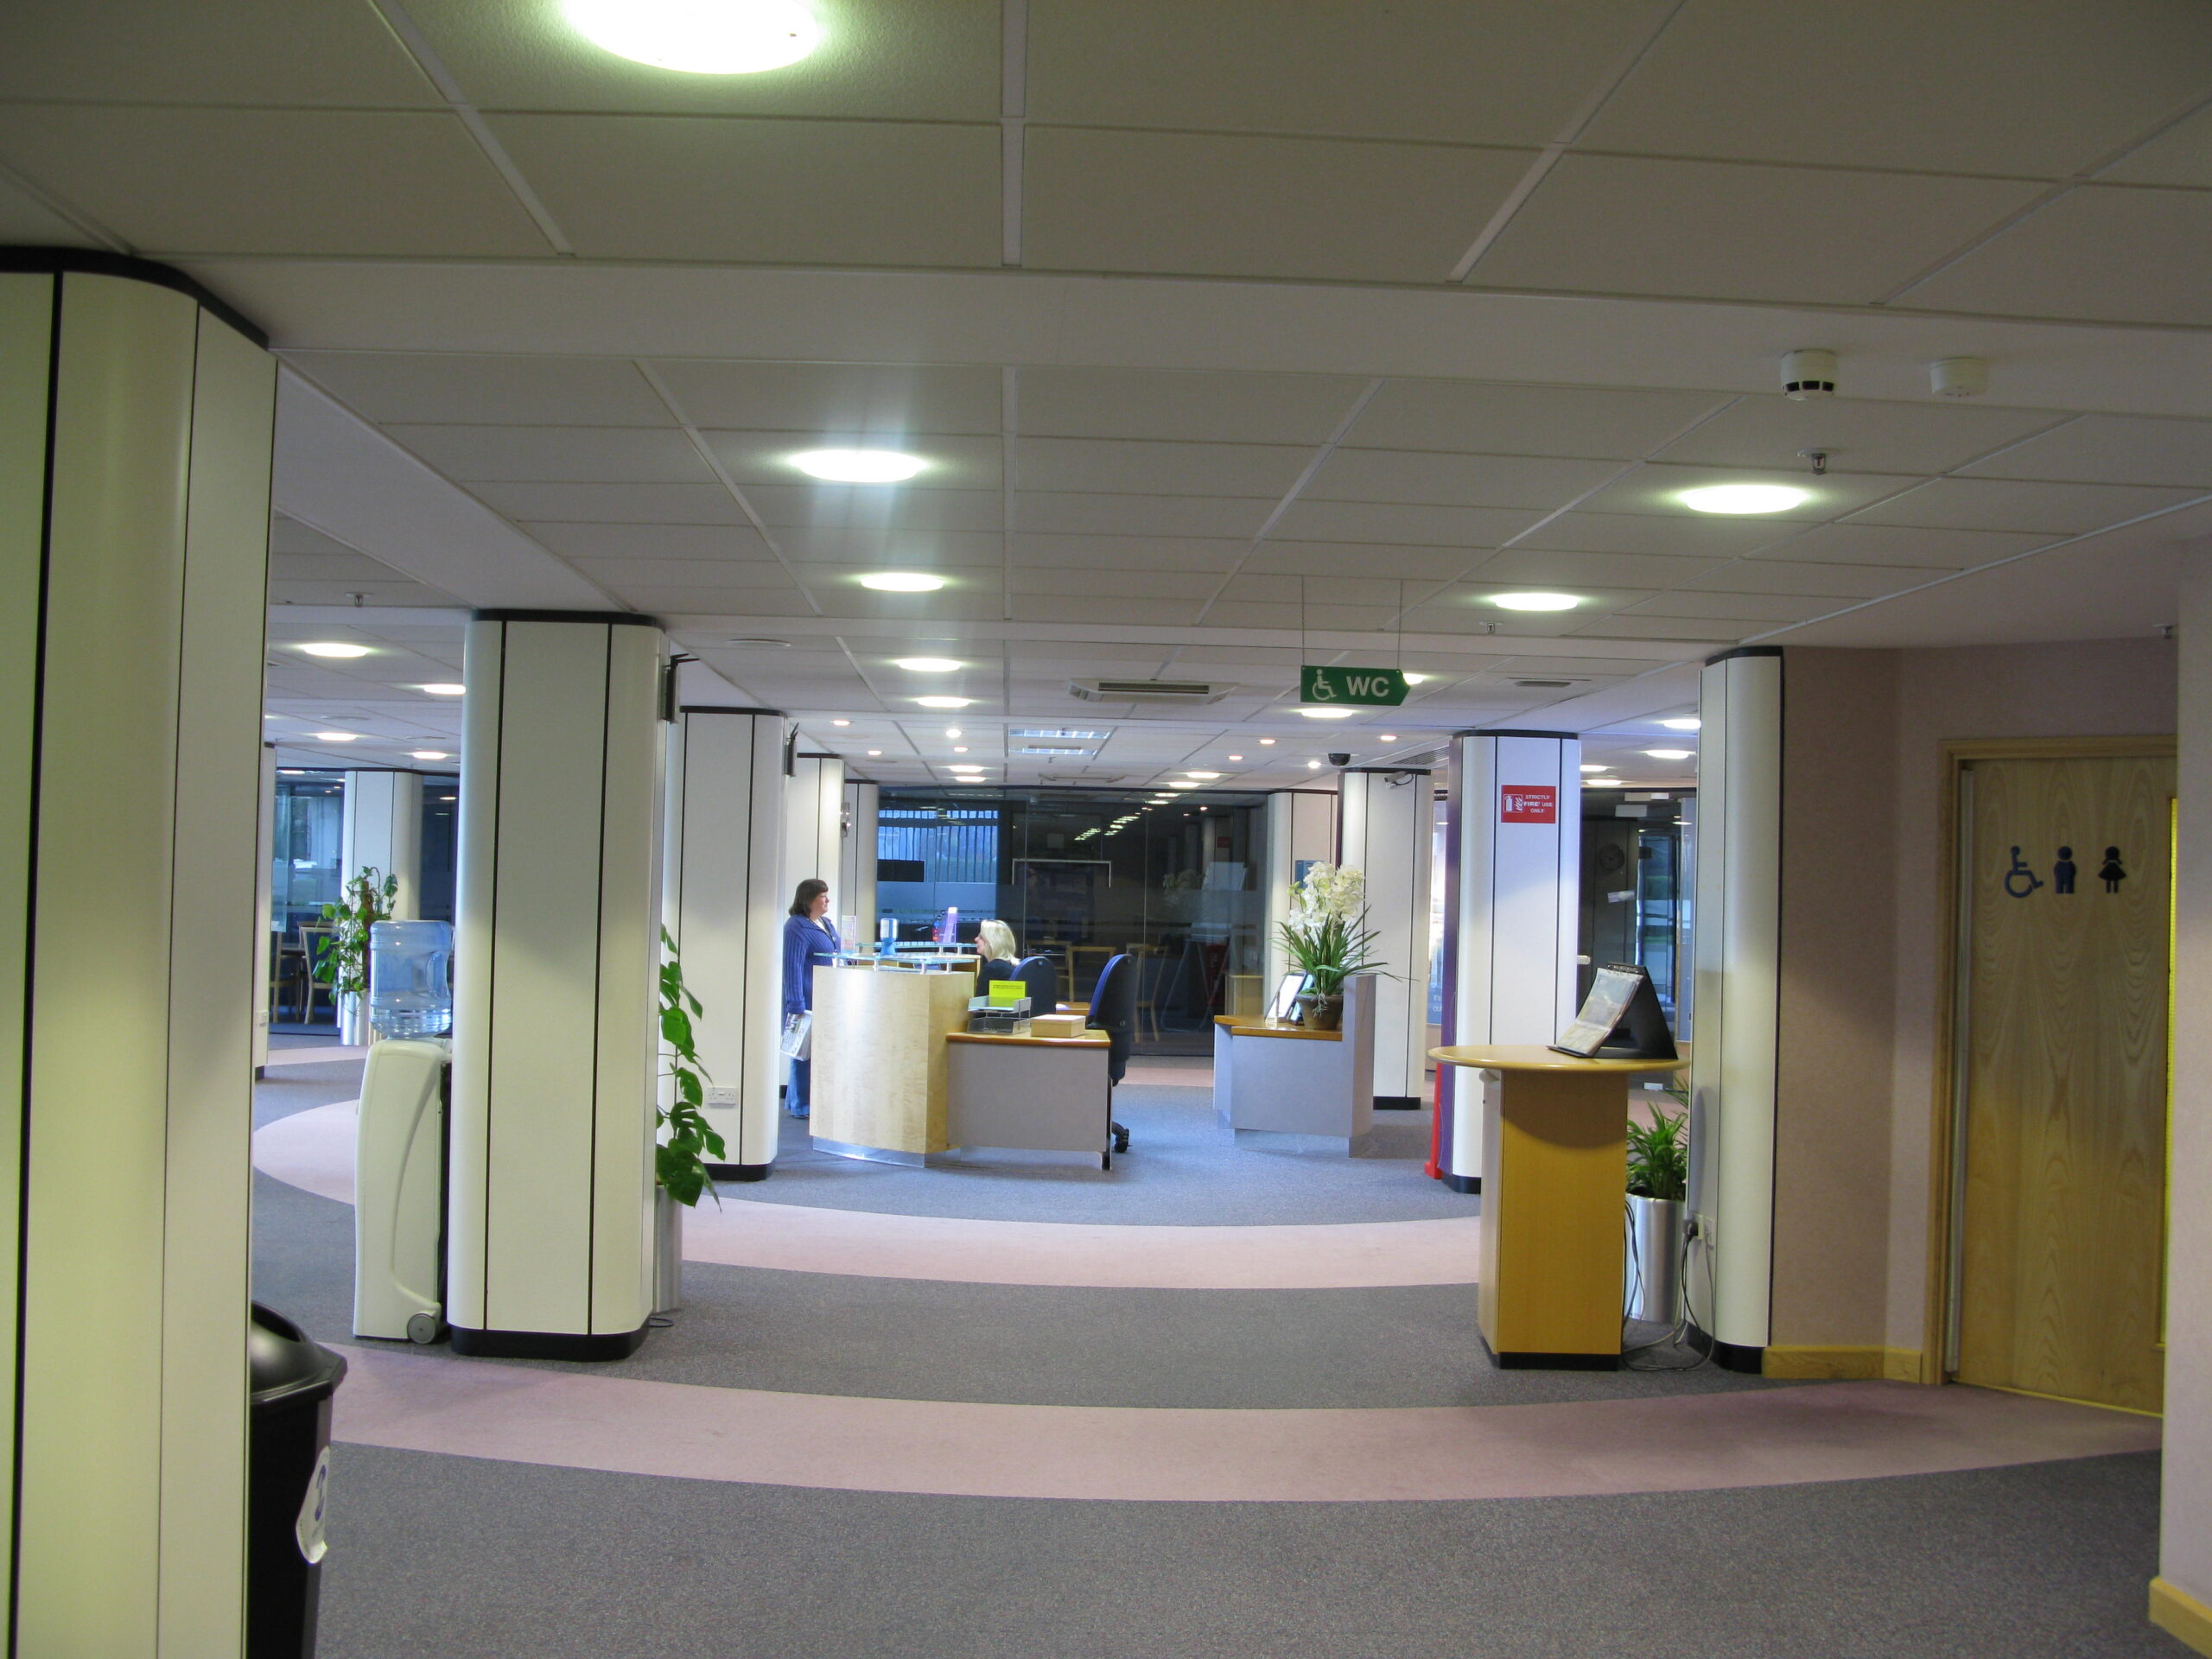 New Reception area, main exit is to the left.